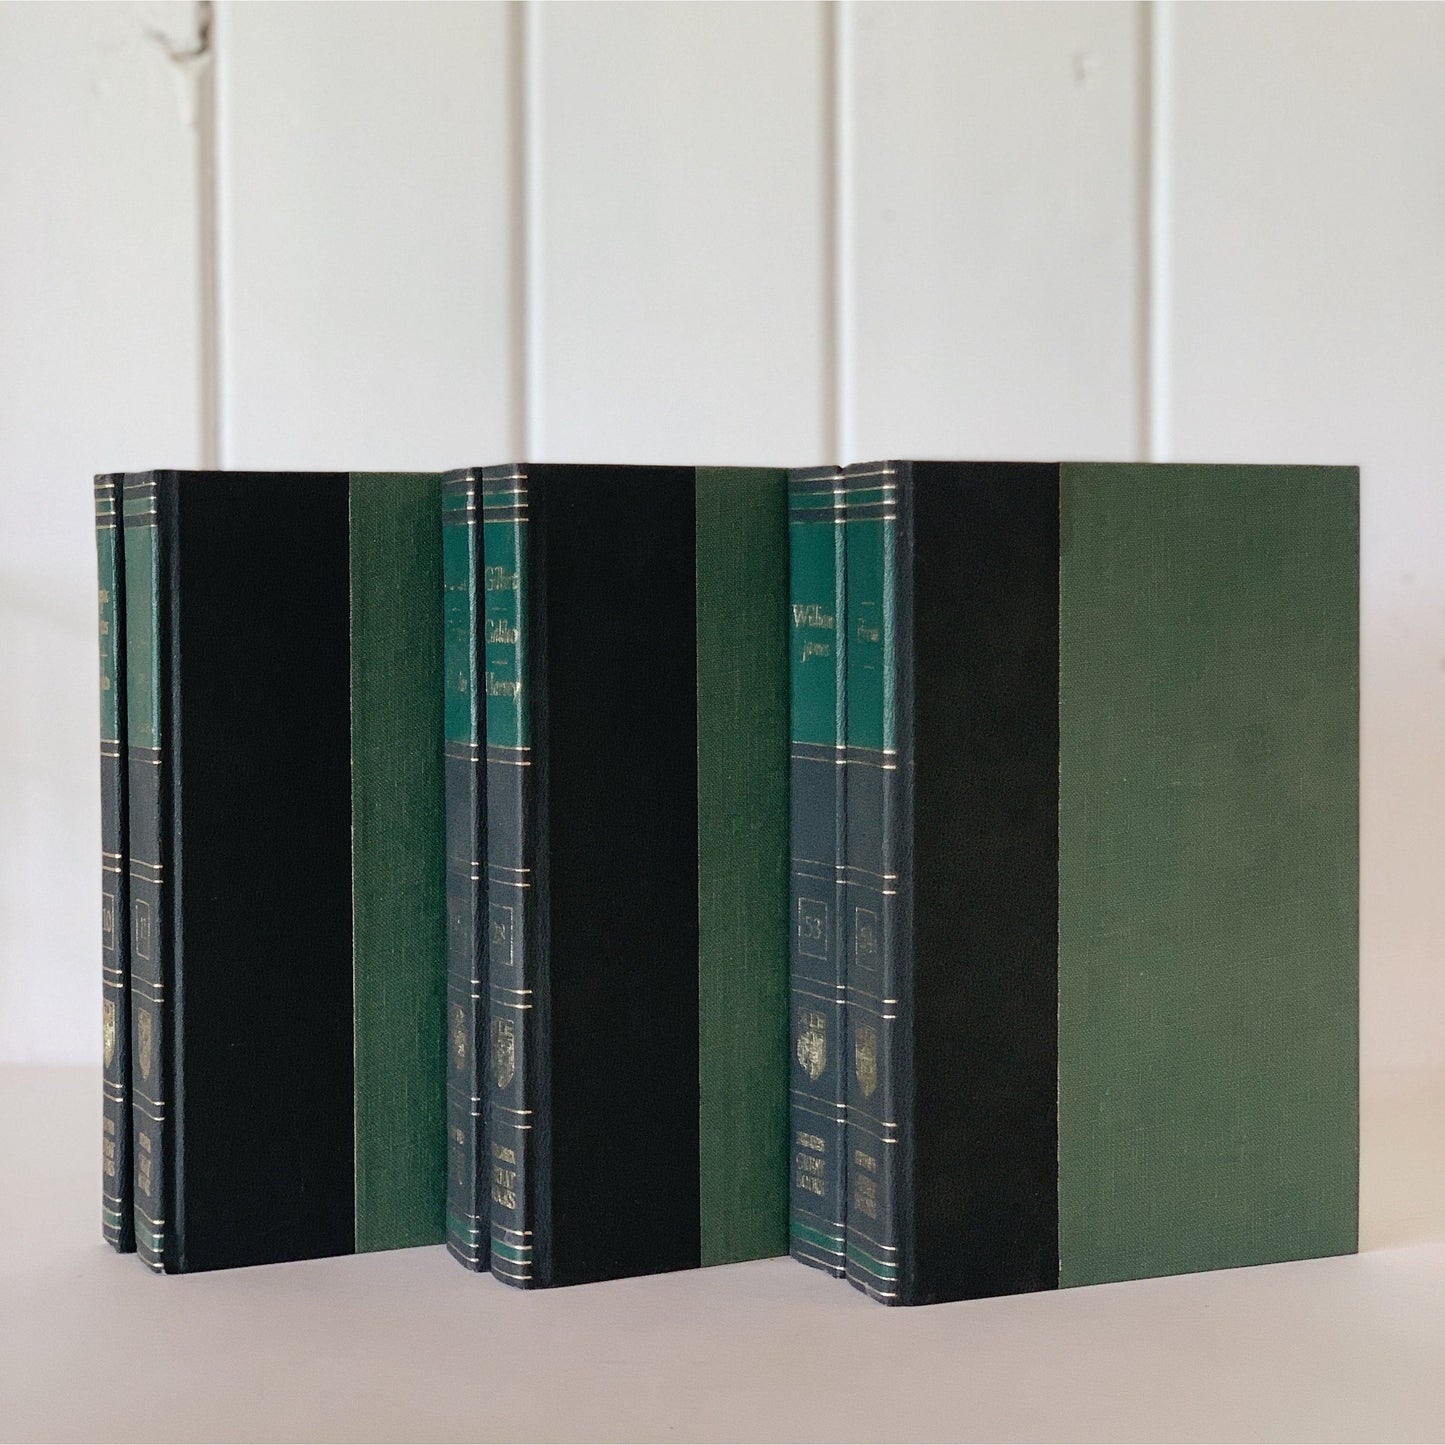 Vintage Black and Green Books, Great Books of the Western World, 1984 Book Set, Office Decor